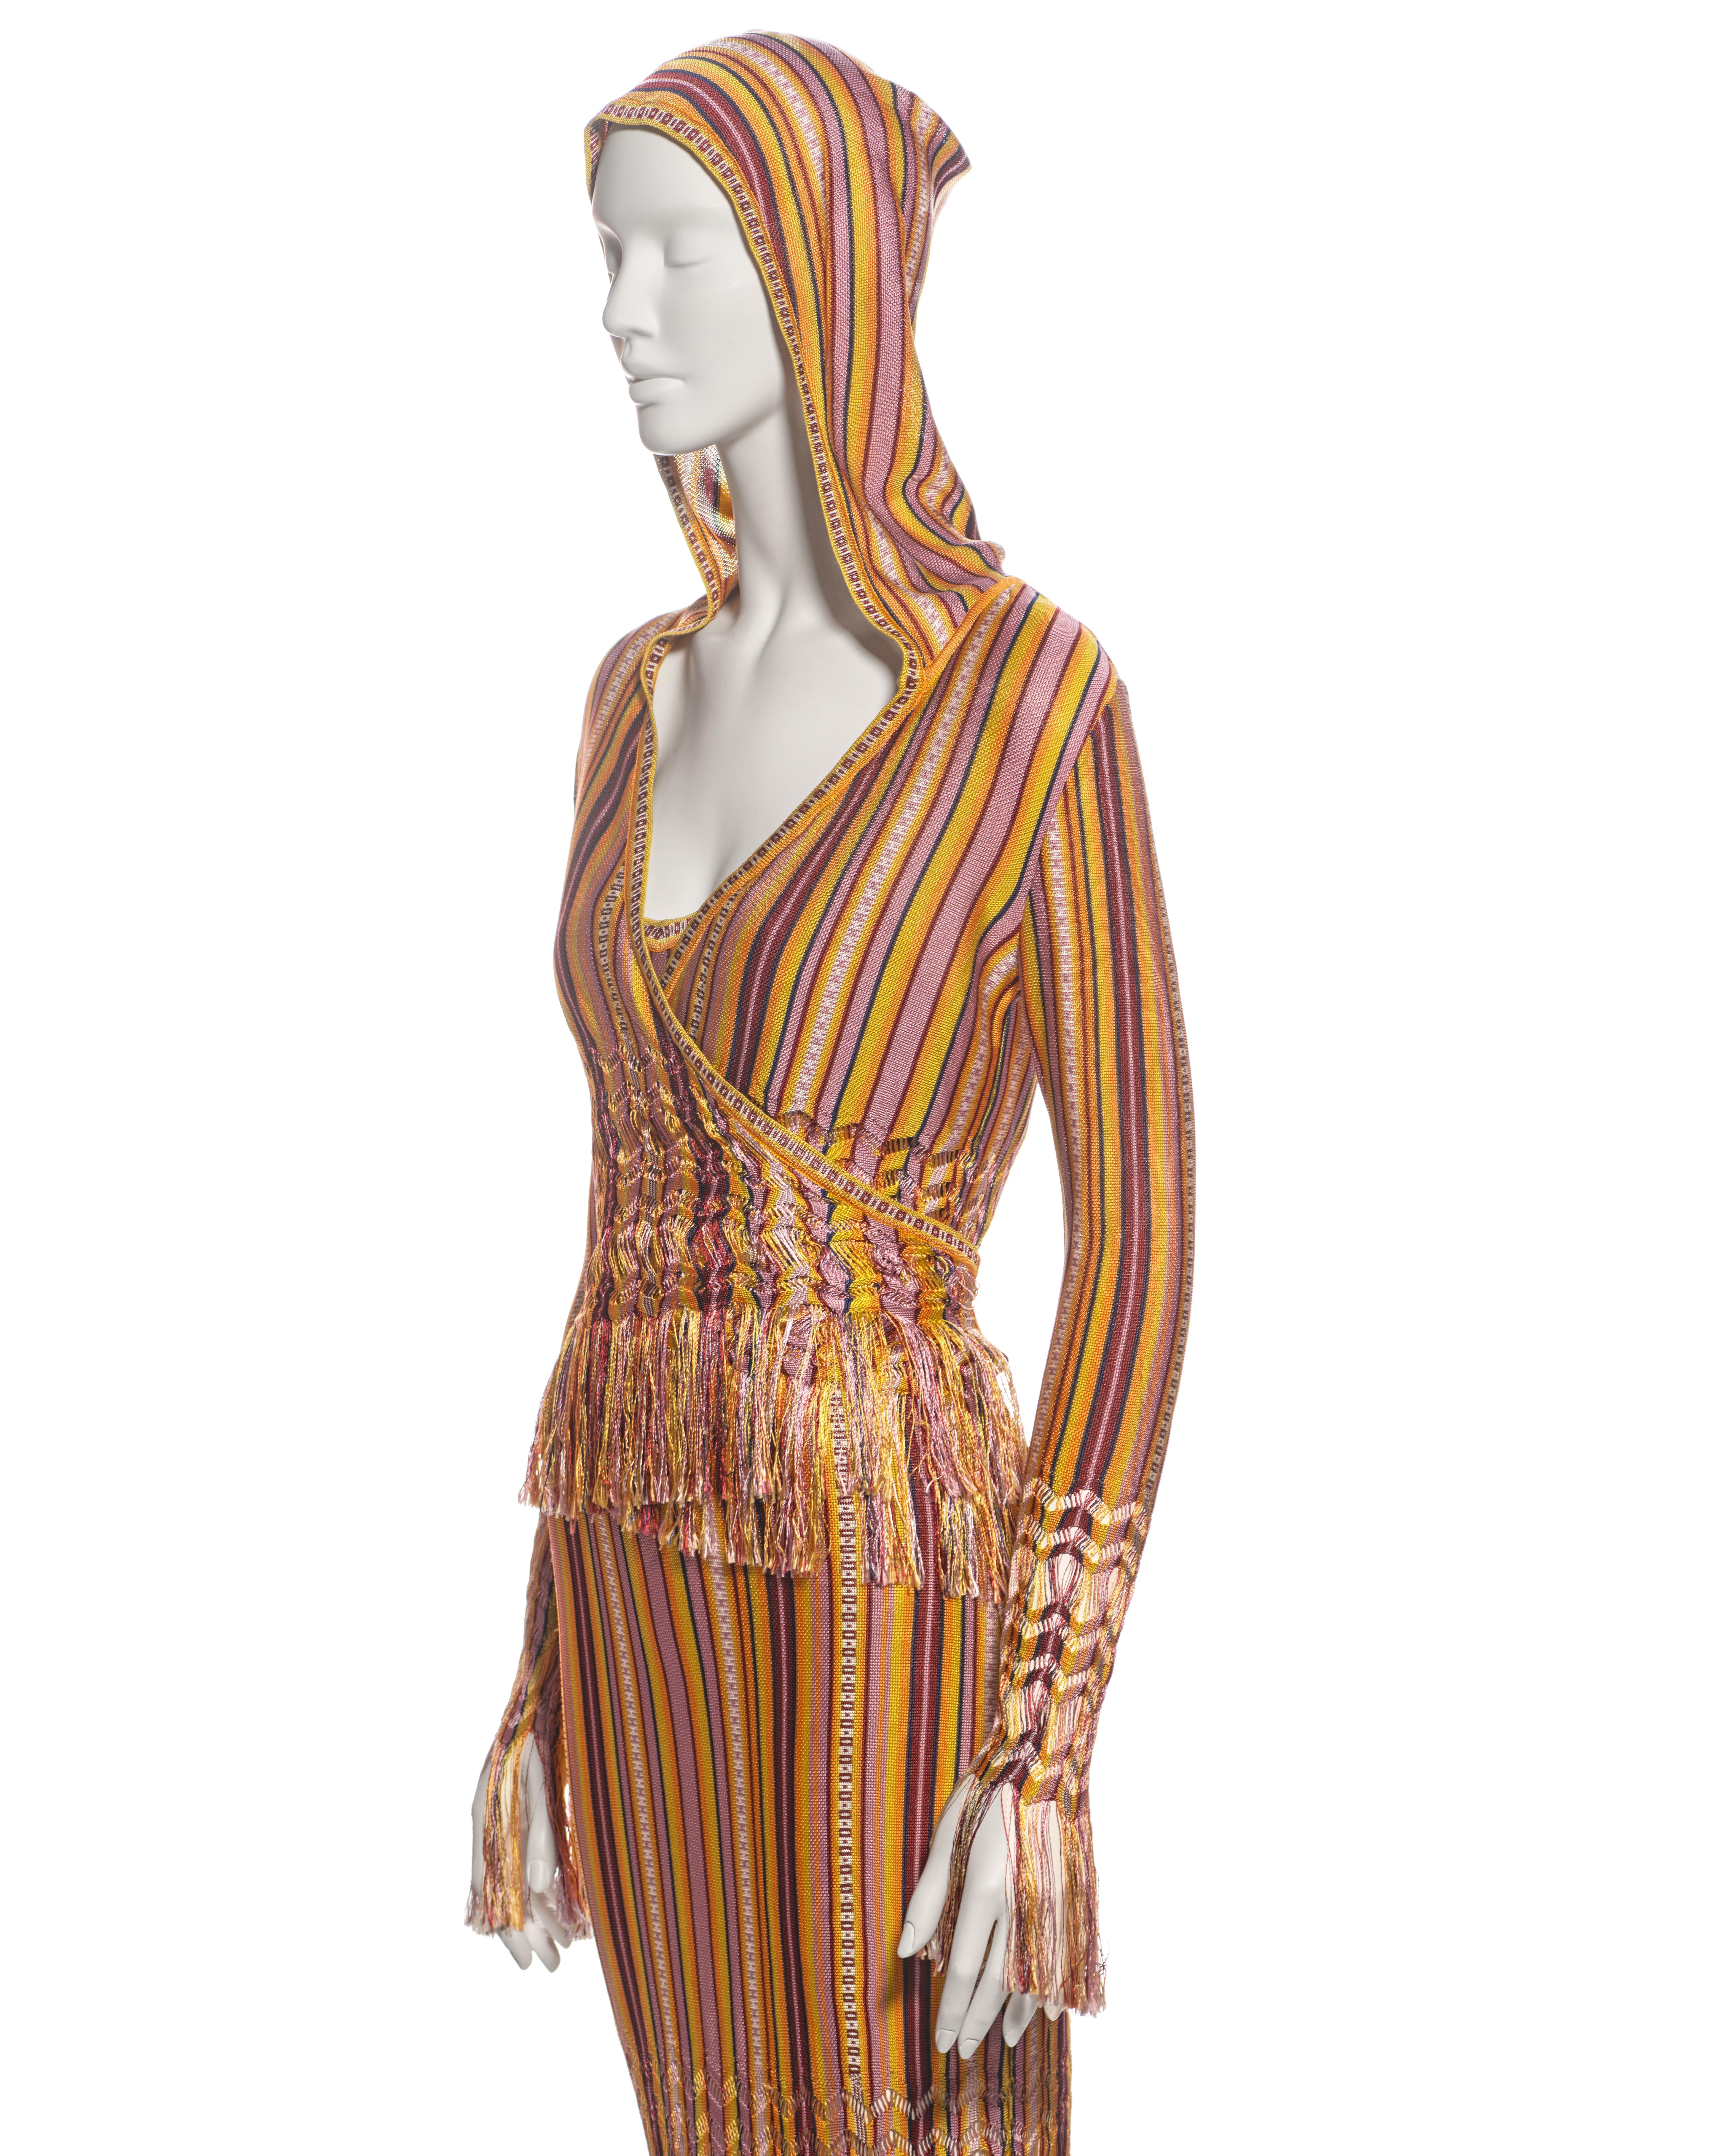 Christian Dior by John Galliano Striped Knit Maxi Dress and Cardigan, ss 2002 For Sale 14